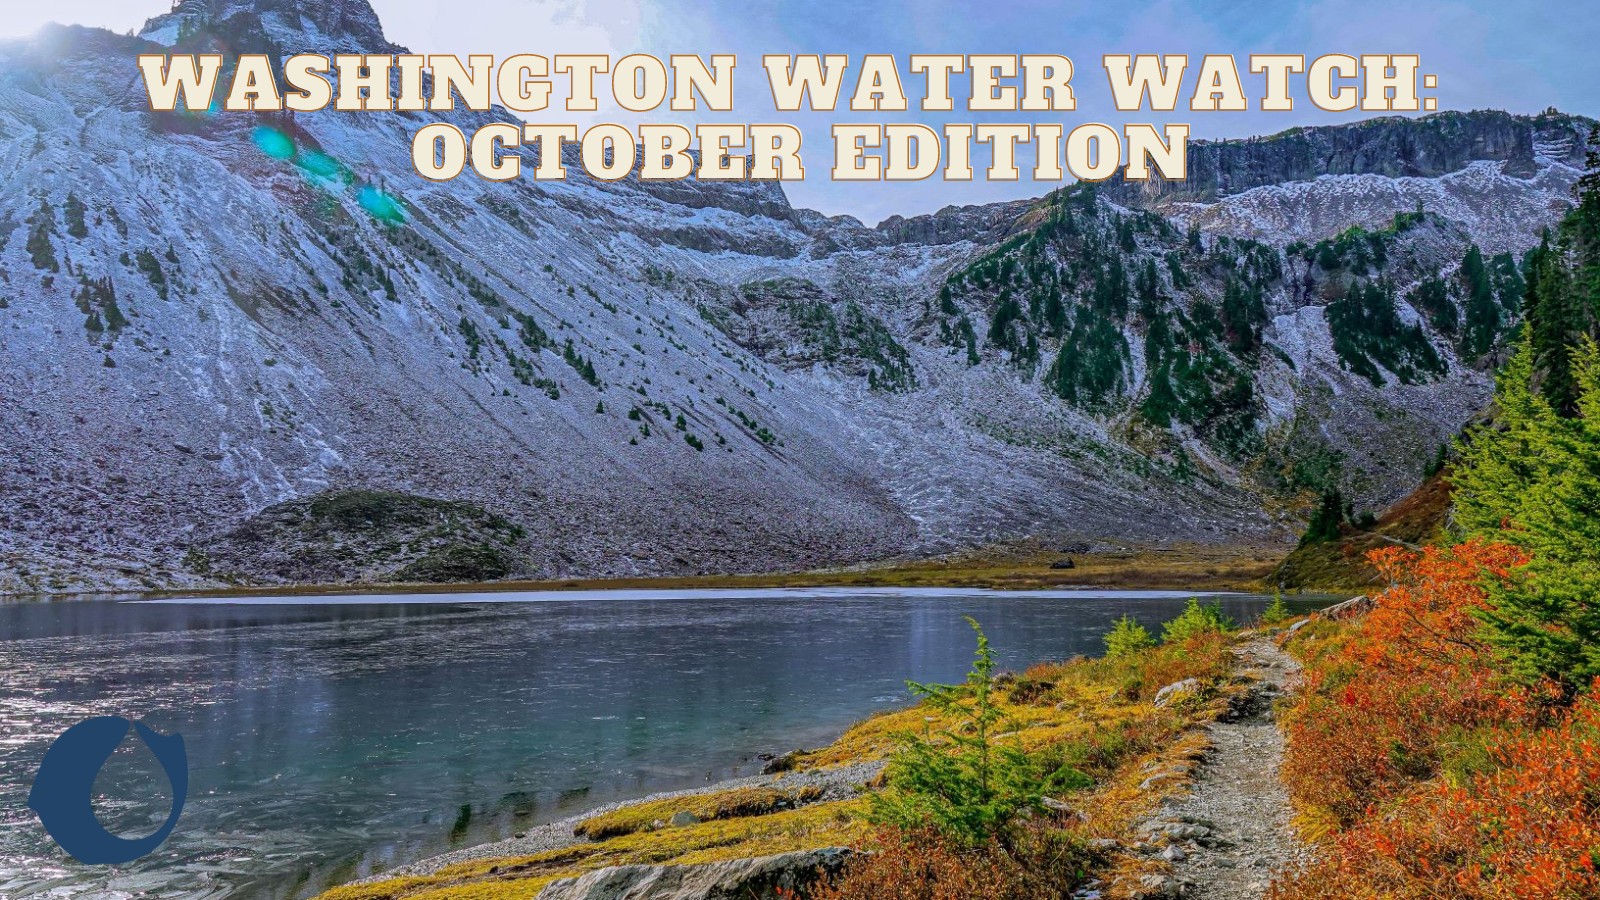 Image of mountain top, water, and foliage. Overlay text reads "Washington Water Watch: October Edition"